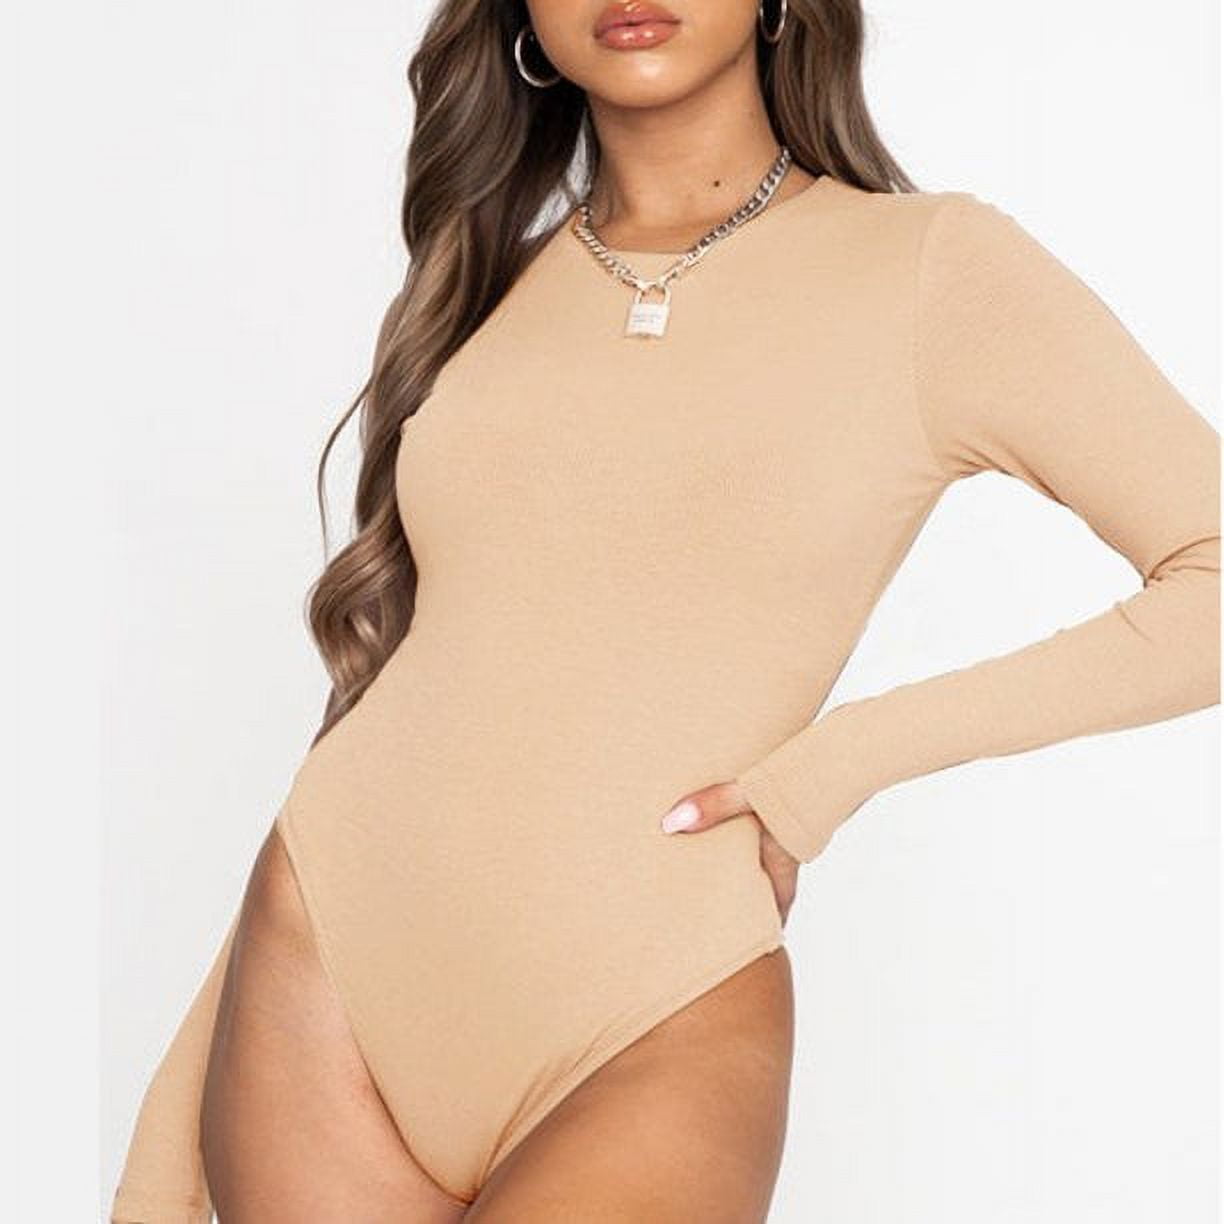  PUMIEY Bodysuit for Women Brown High Cut Body Suits